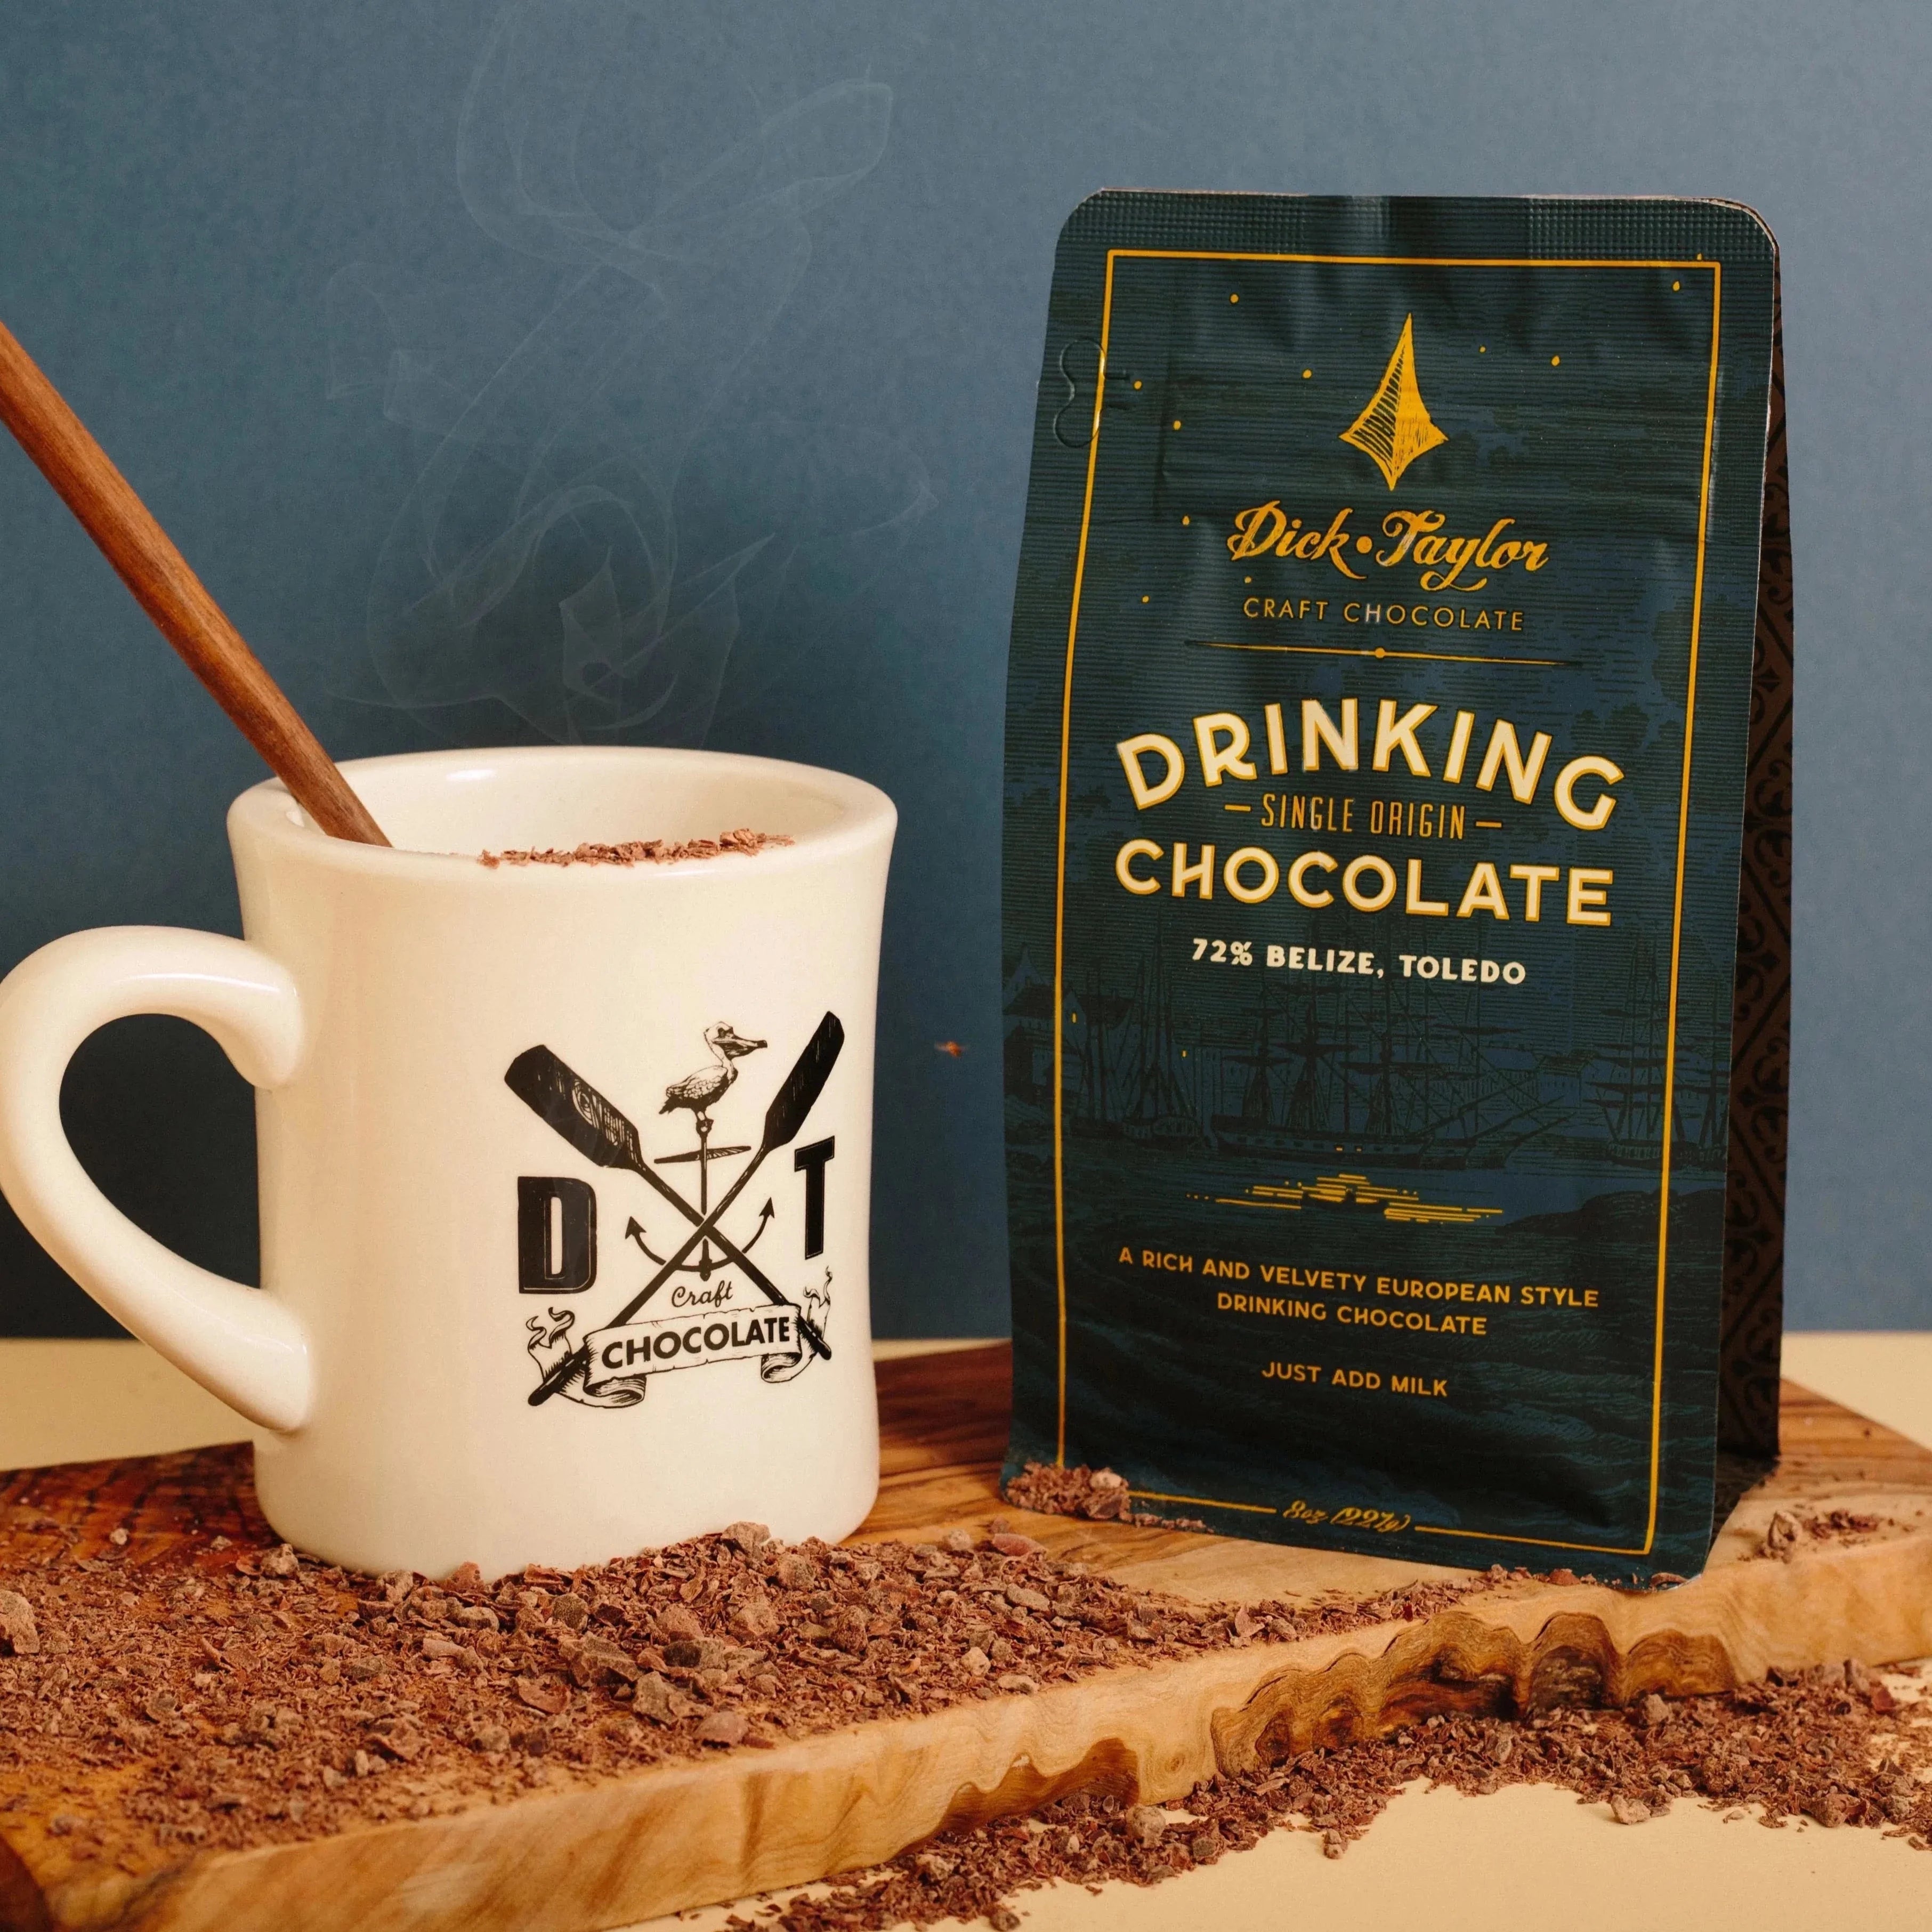 white mug with wooden spoon in it full of drinking hot chocolate. Blue bag of drinking chocolate to the right of it. Both items are on wooden cutting board with a blue background 